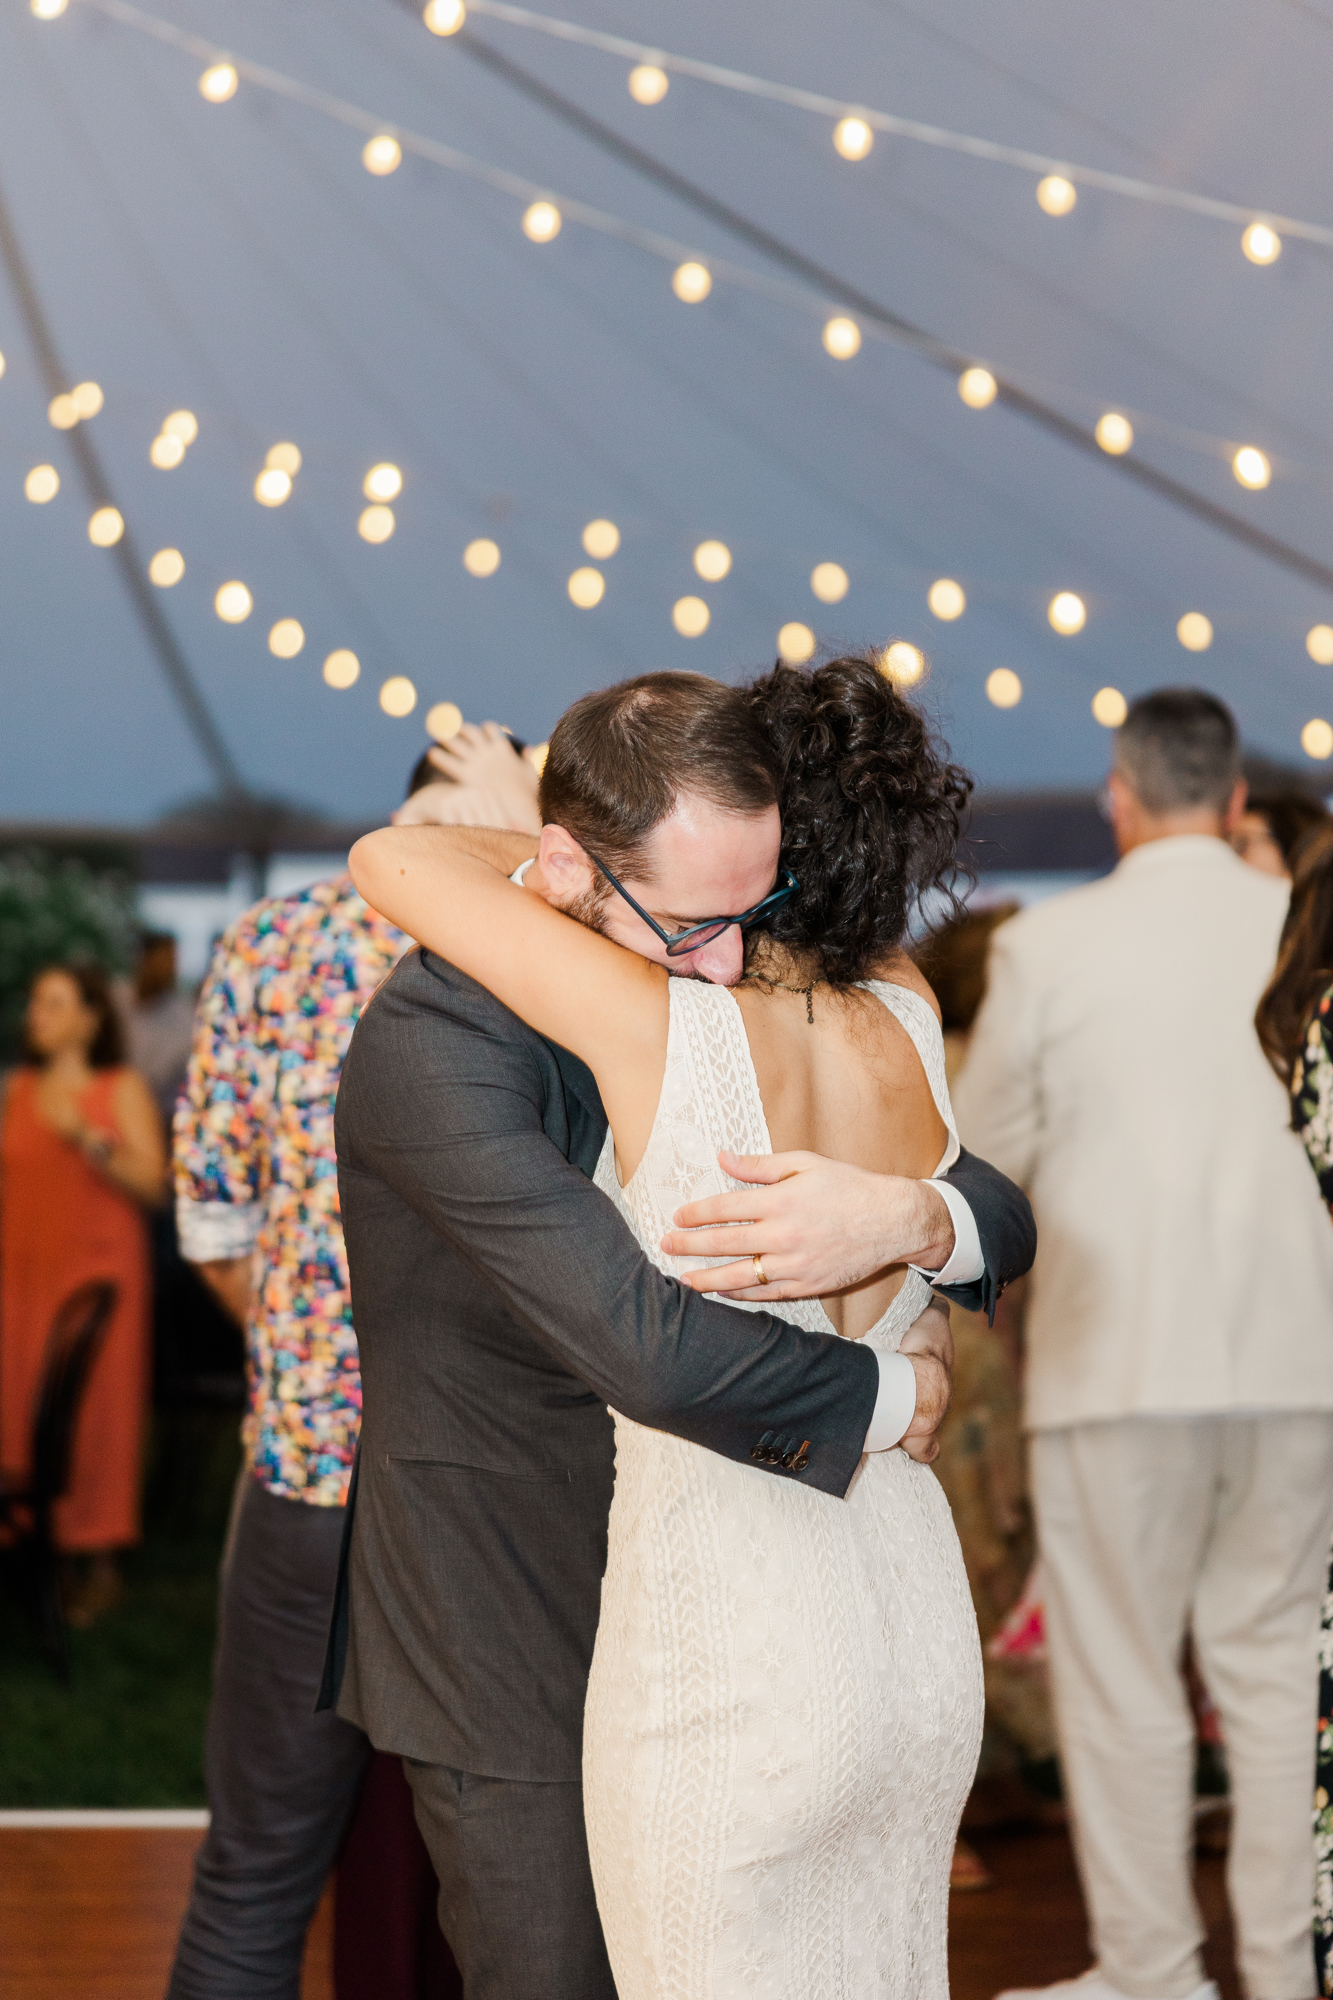 Intimate Glynwood Farms Wedding in Cold Spring, NY